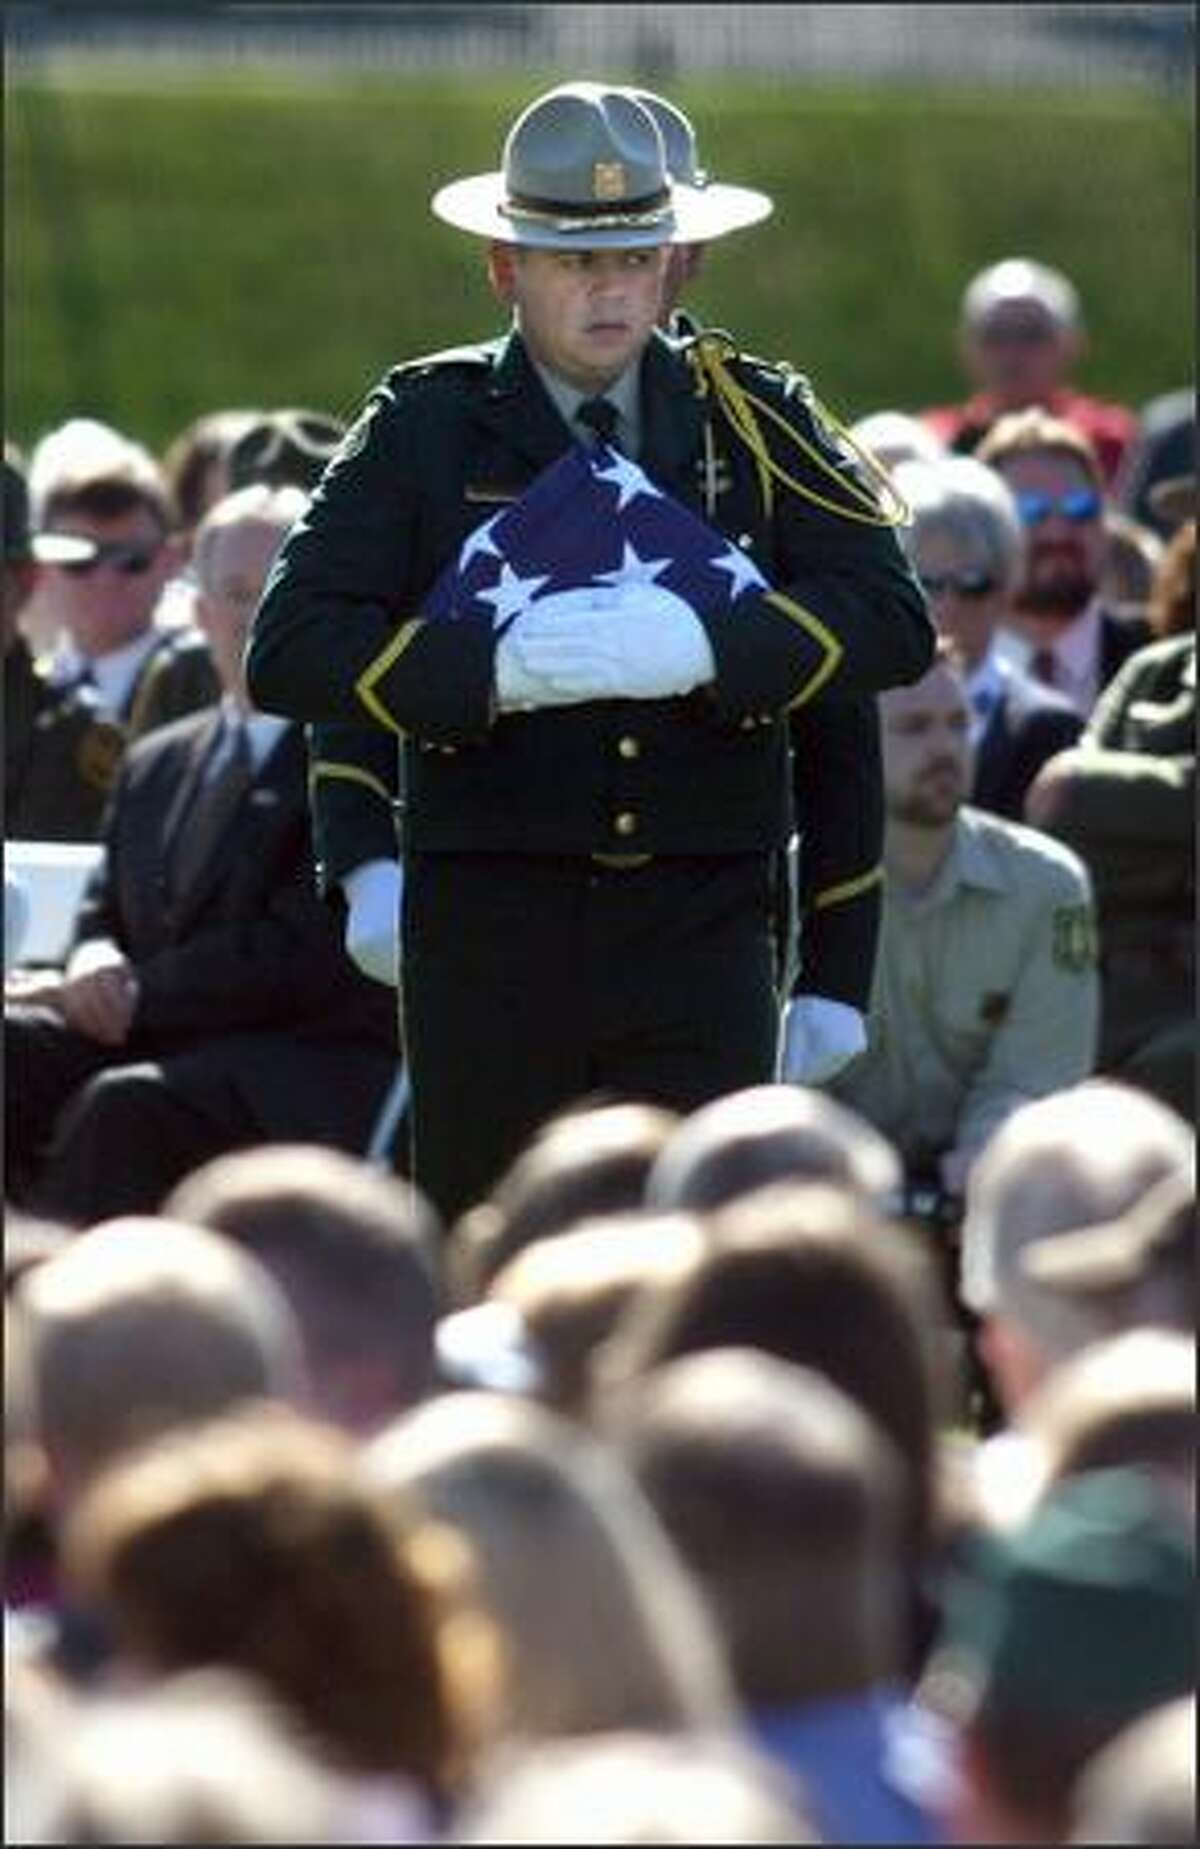 Forest Service officials prepare to unforld, display and refold an American flag to be given to Kristine Fairbanks' daughter, Whitney Fairbanks, during a memorial service for the slain officer in Port Angeles on Monday.